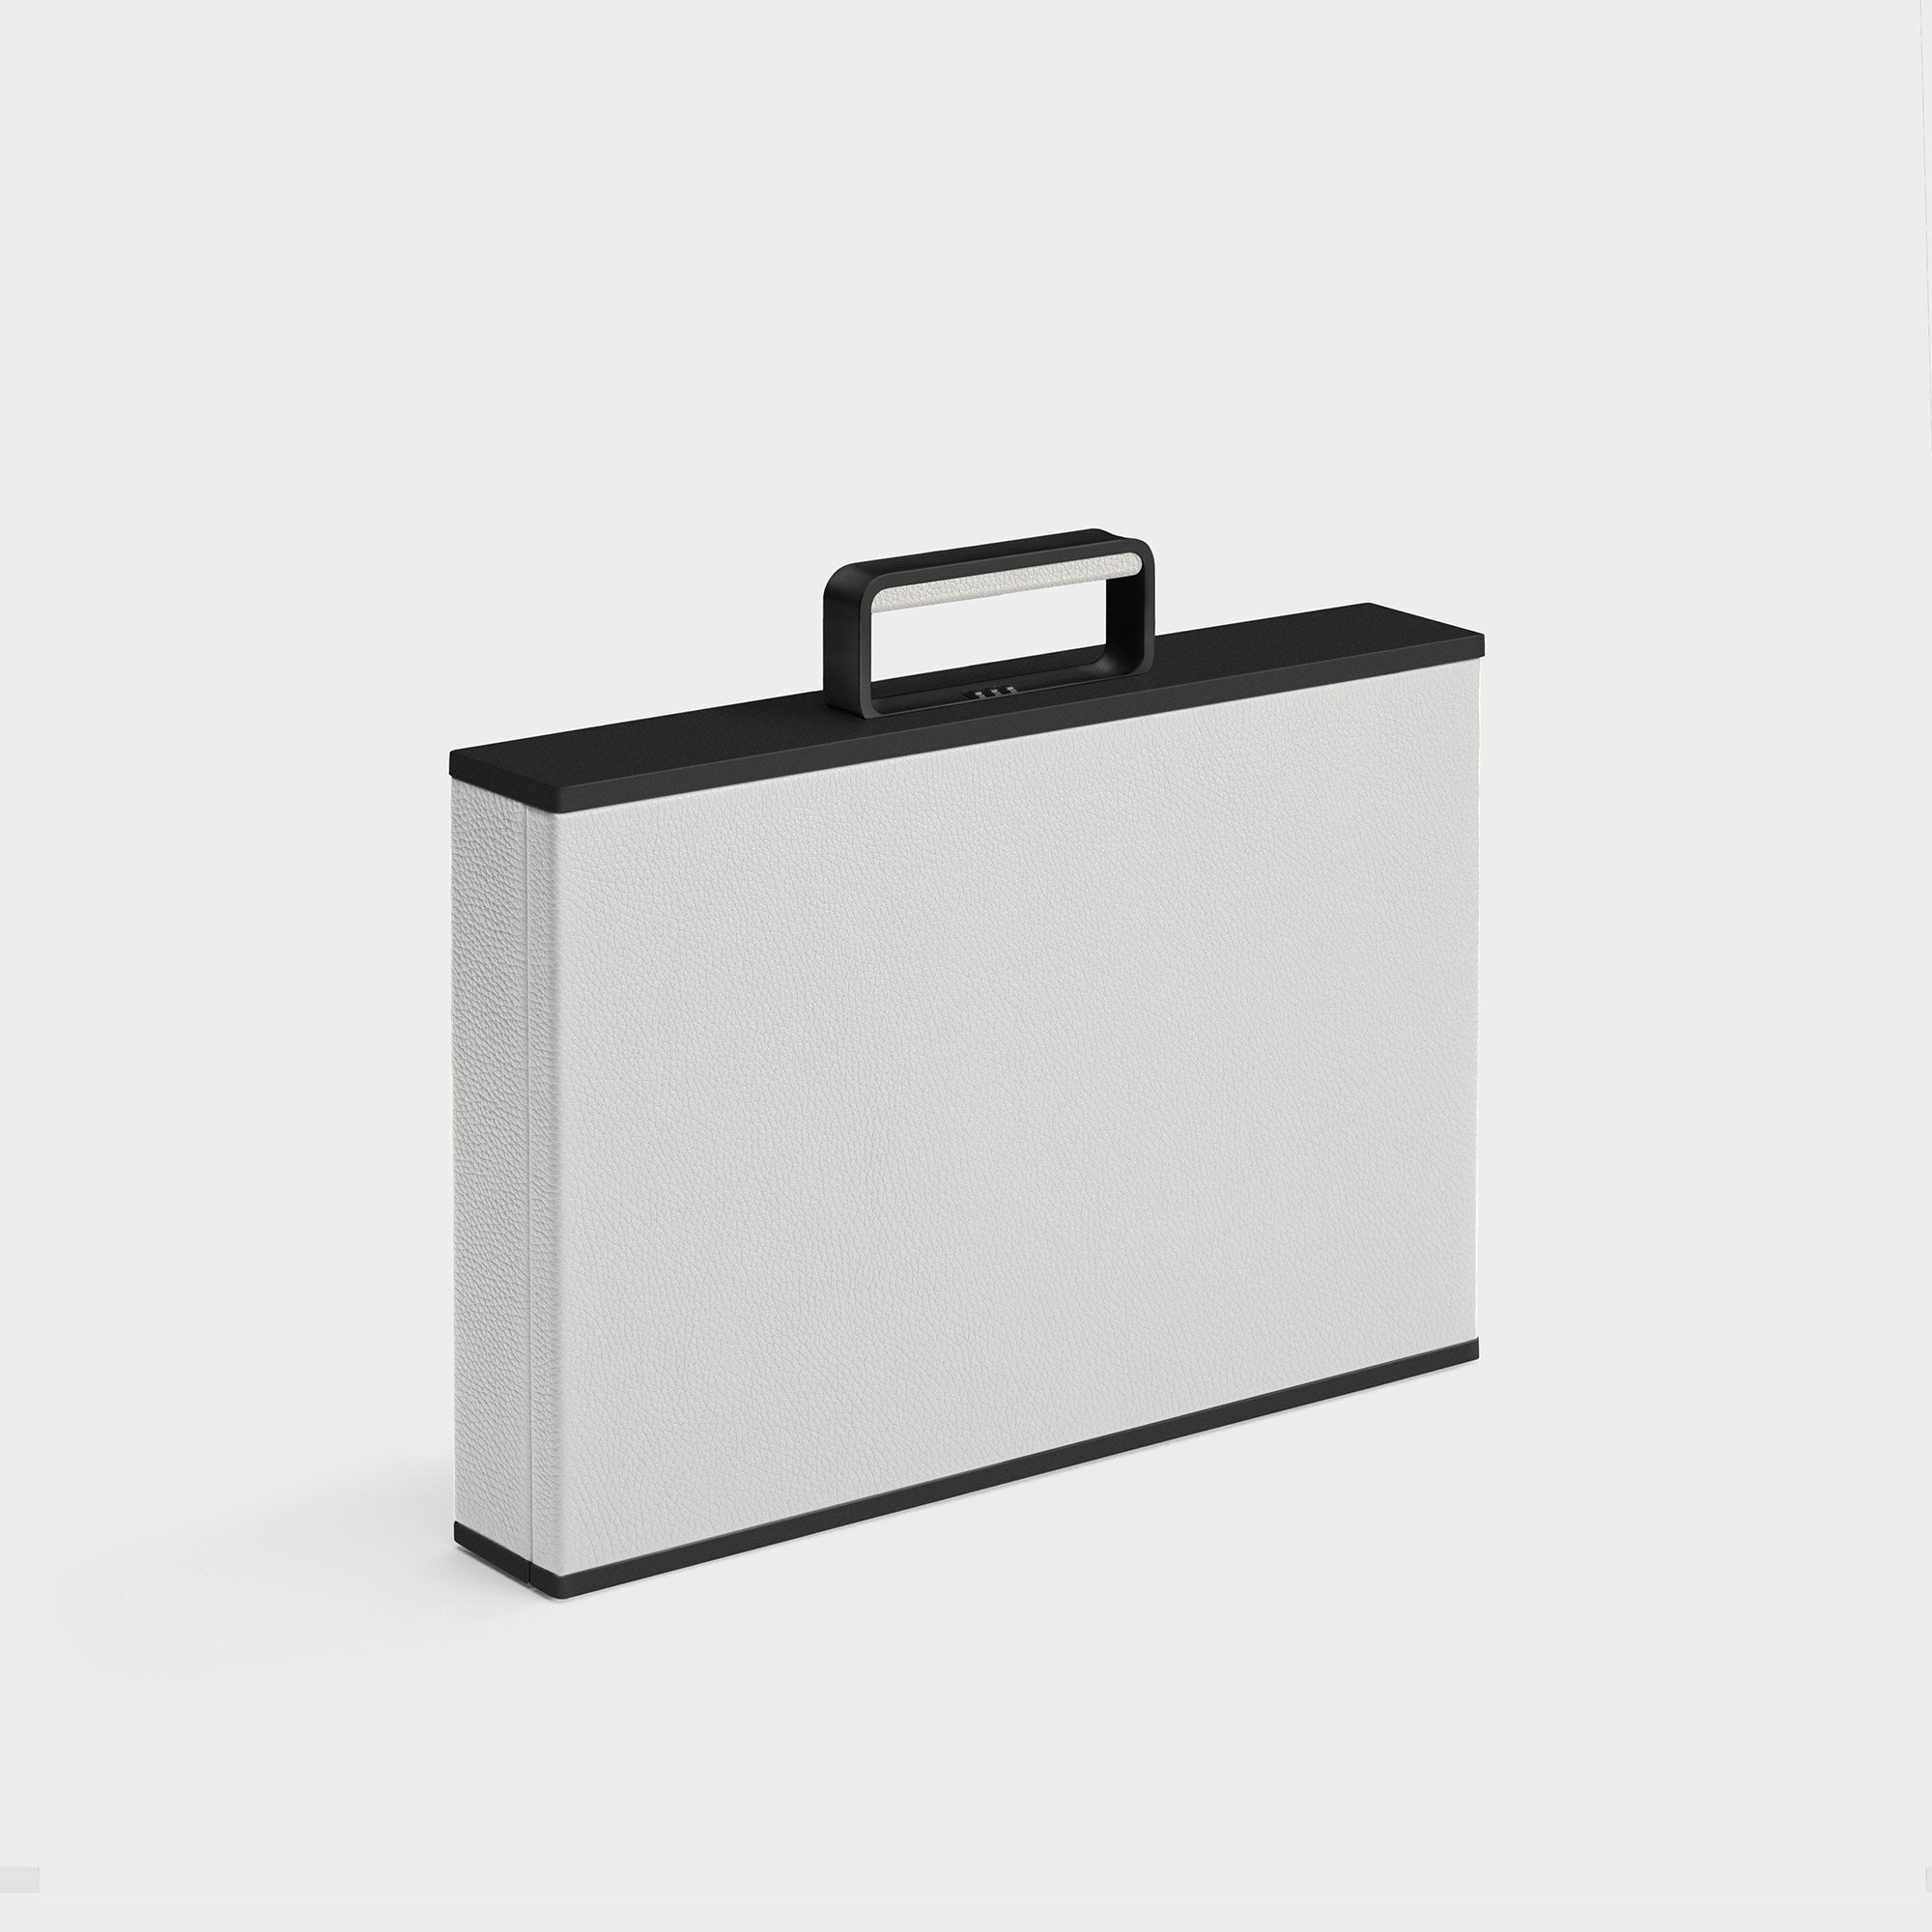 Product photo of angled view of the minimalist white leather and black carbon fiber and anodized aluminum Mackenzie Briefcase